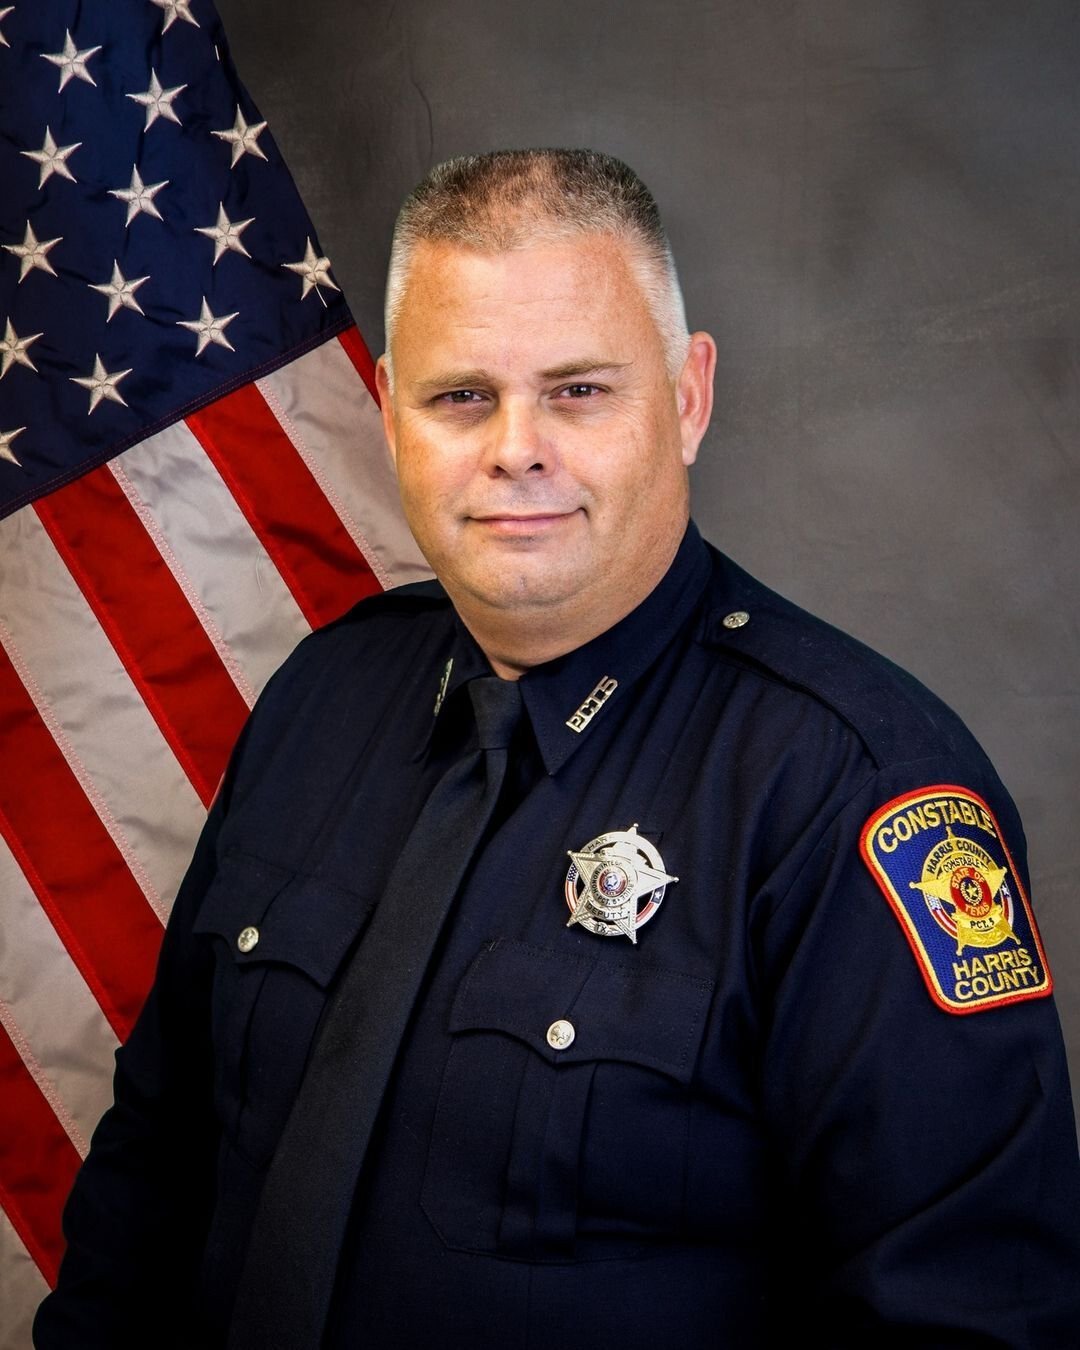 <i>Harris County Precinct 5</i><br/>The Harris County Precinct 5 deputy killed early Sunday morning has been identified as a 12-year veteran of the department